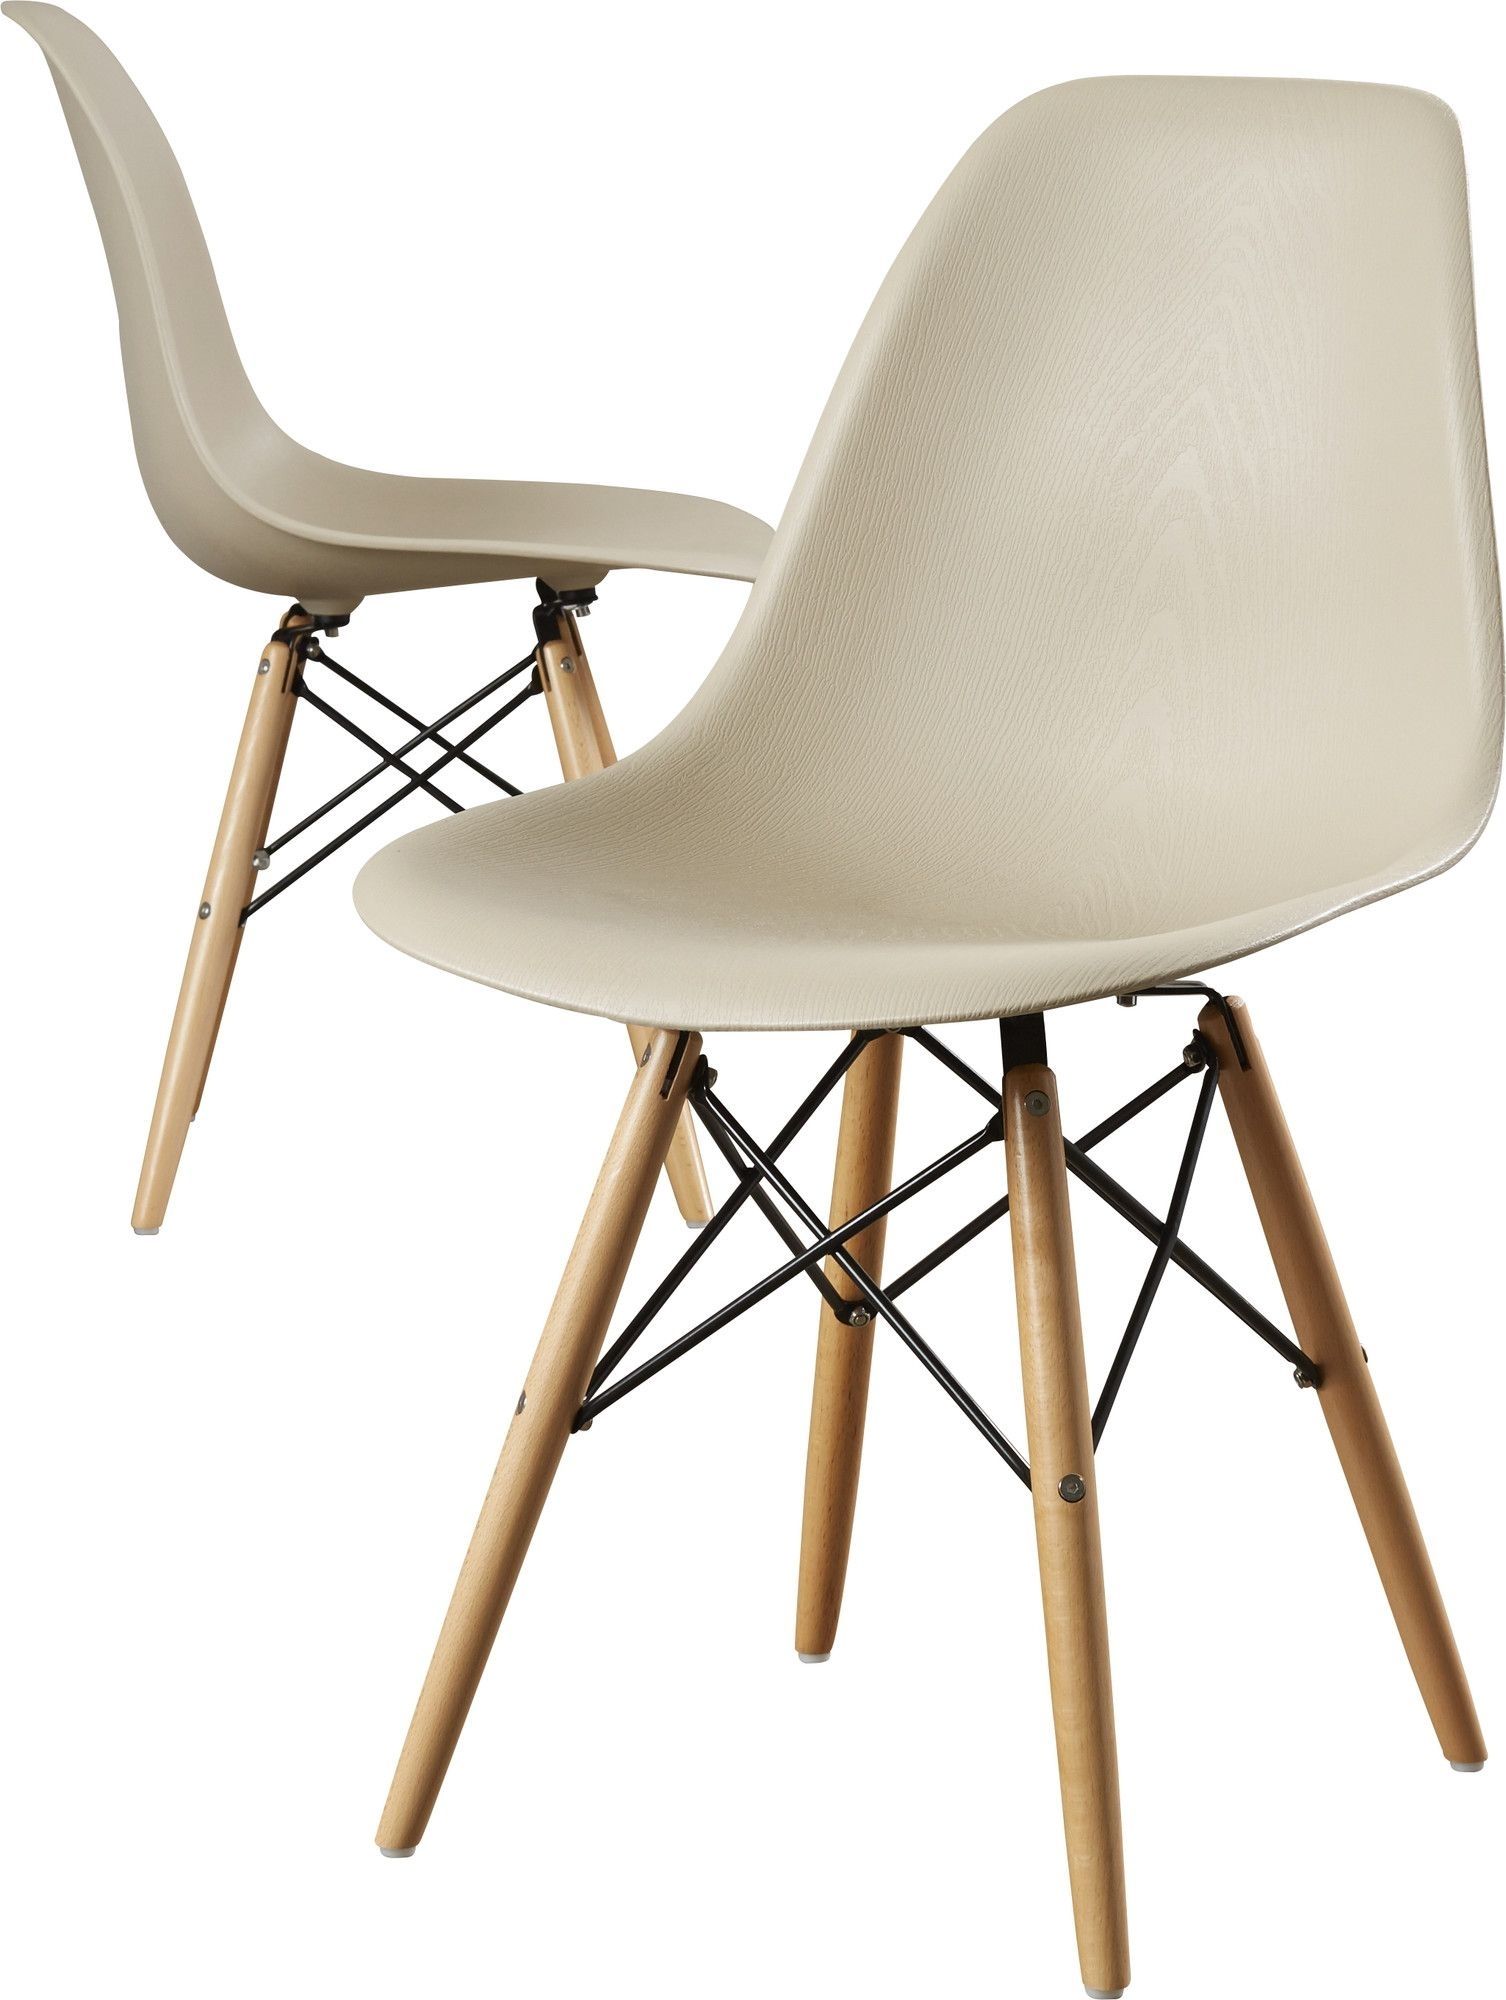 Famous You'll Love The Lucas Side Chair At Joss & Main – With Great Deals Intended For Joss Side Chairs (View 2 of 20)